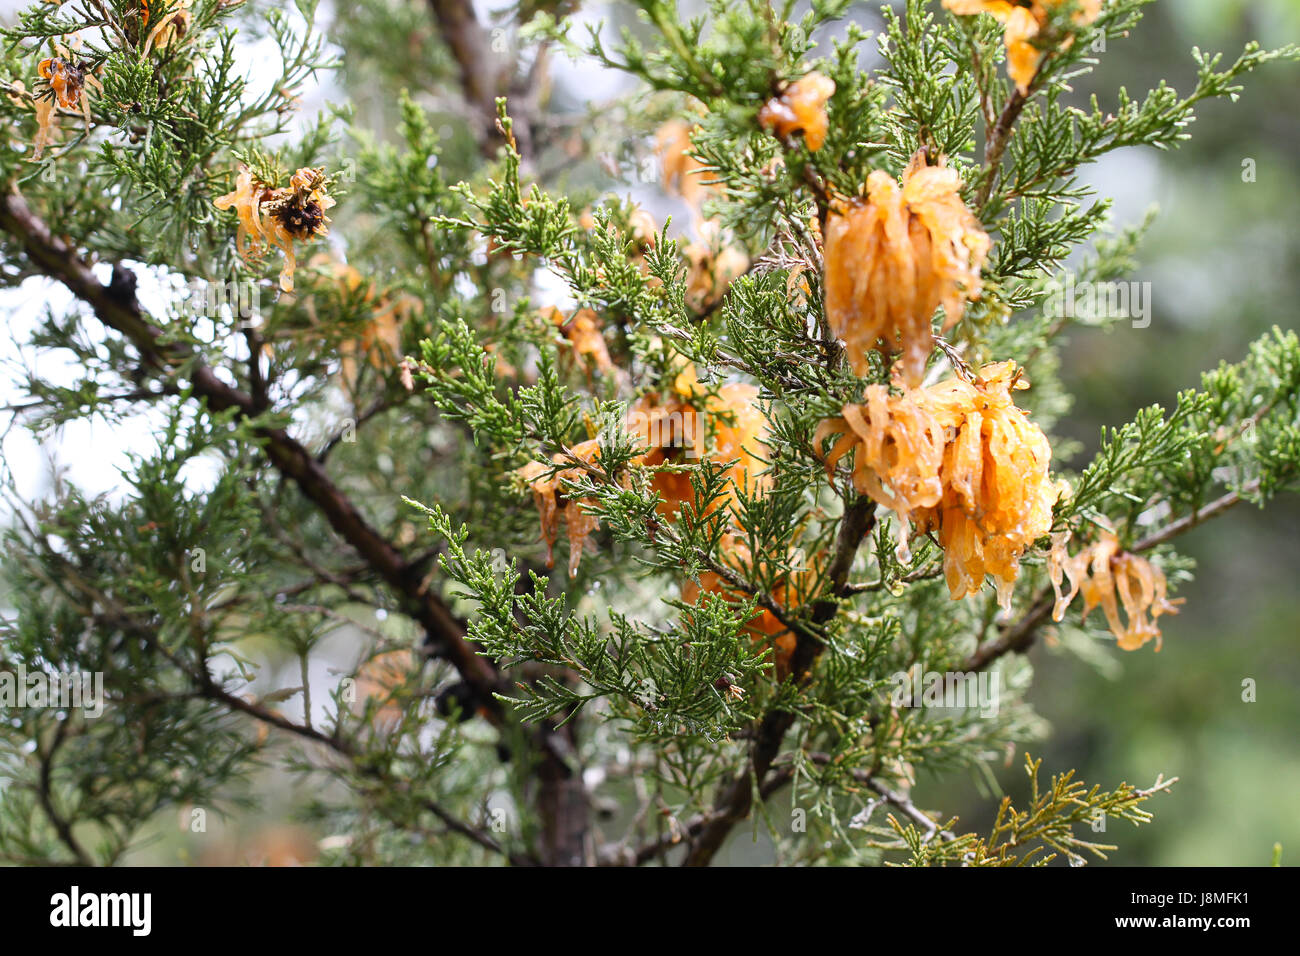 An alien invasion? Mature Cedar Apple Rust displays gelatinous orange tendrils after a rainstorm in spring. Spores harmful to any nearby apple trees. Stock Photo